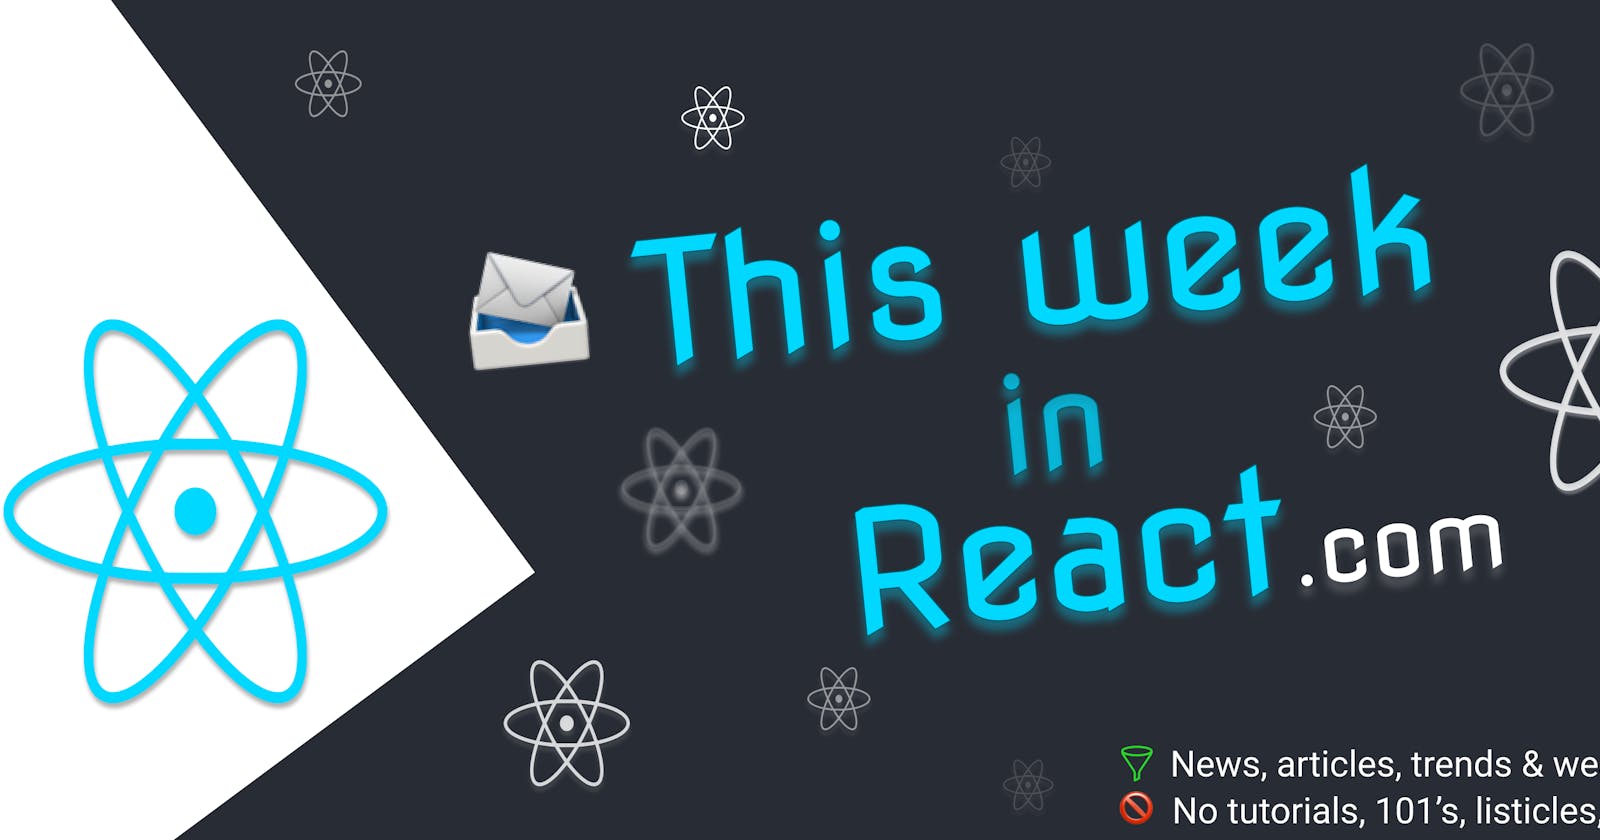 This Week In React #140: React Labs, Storybook, Astro, refs, Ark, Impala, Docusaurus, Expo-Blur, WebView, AsyncContext...